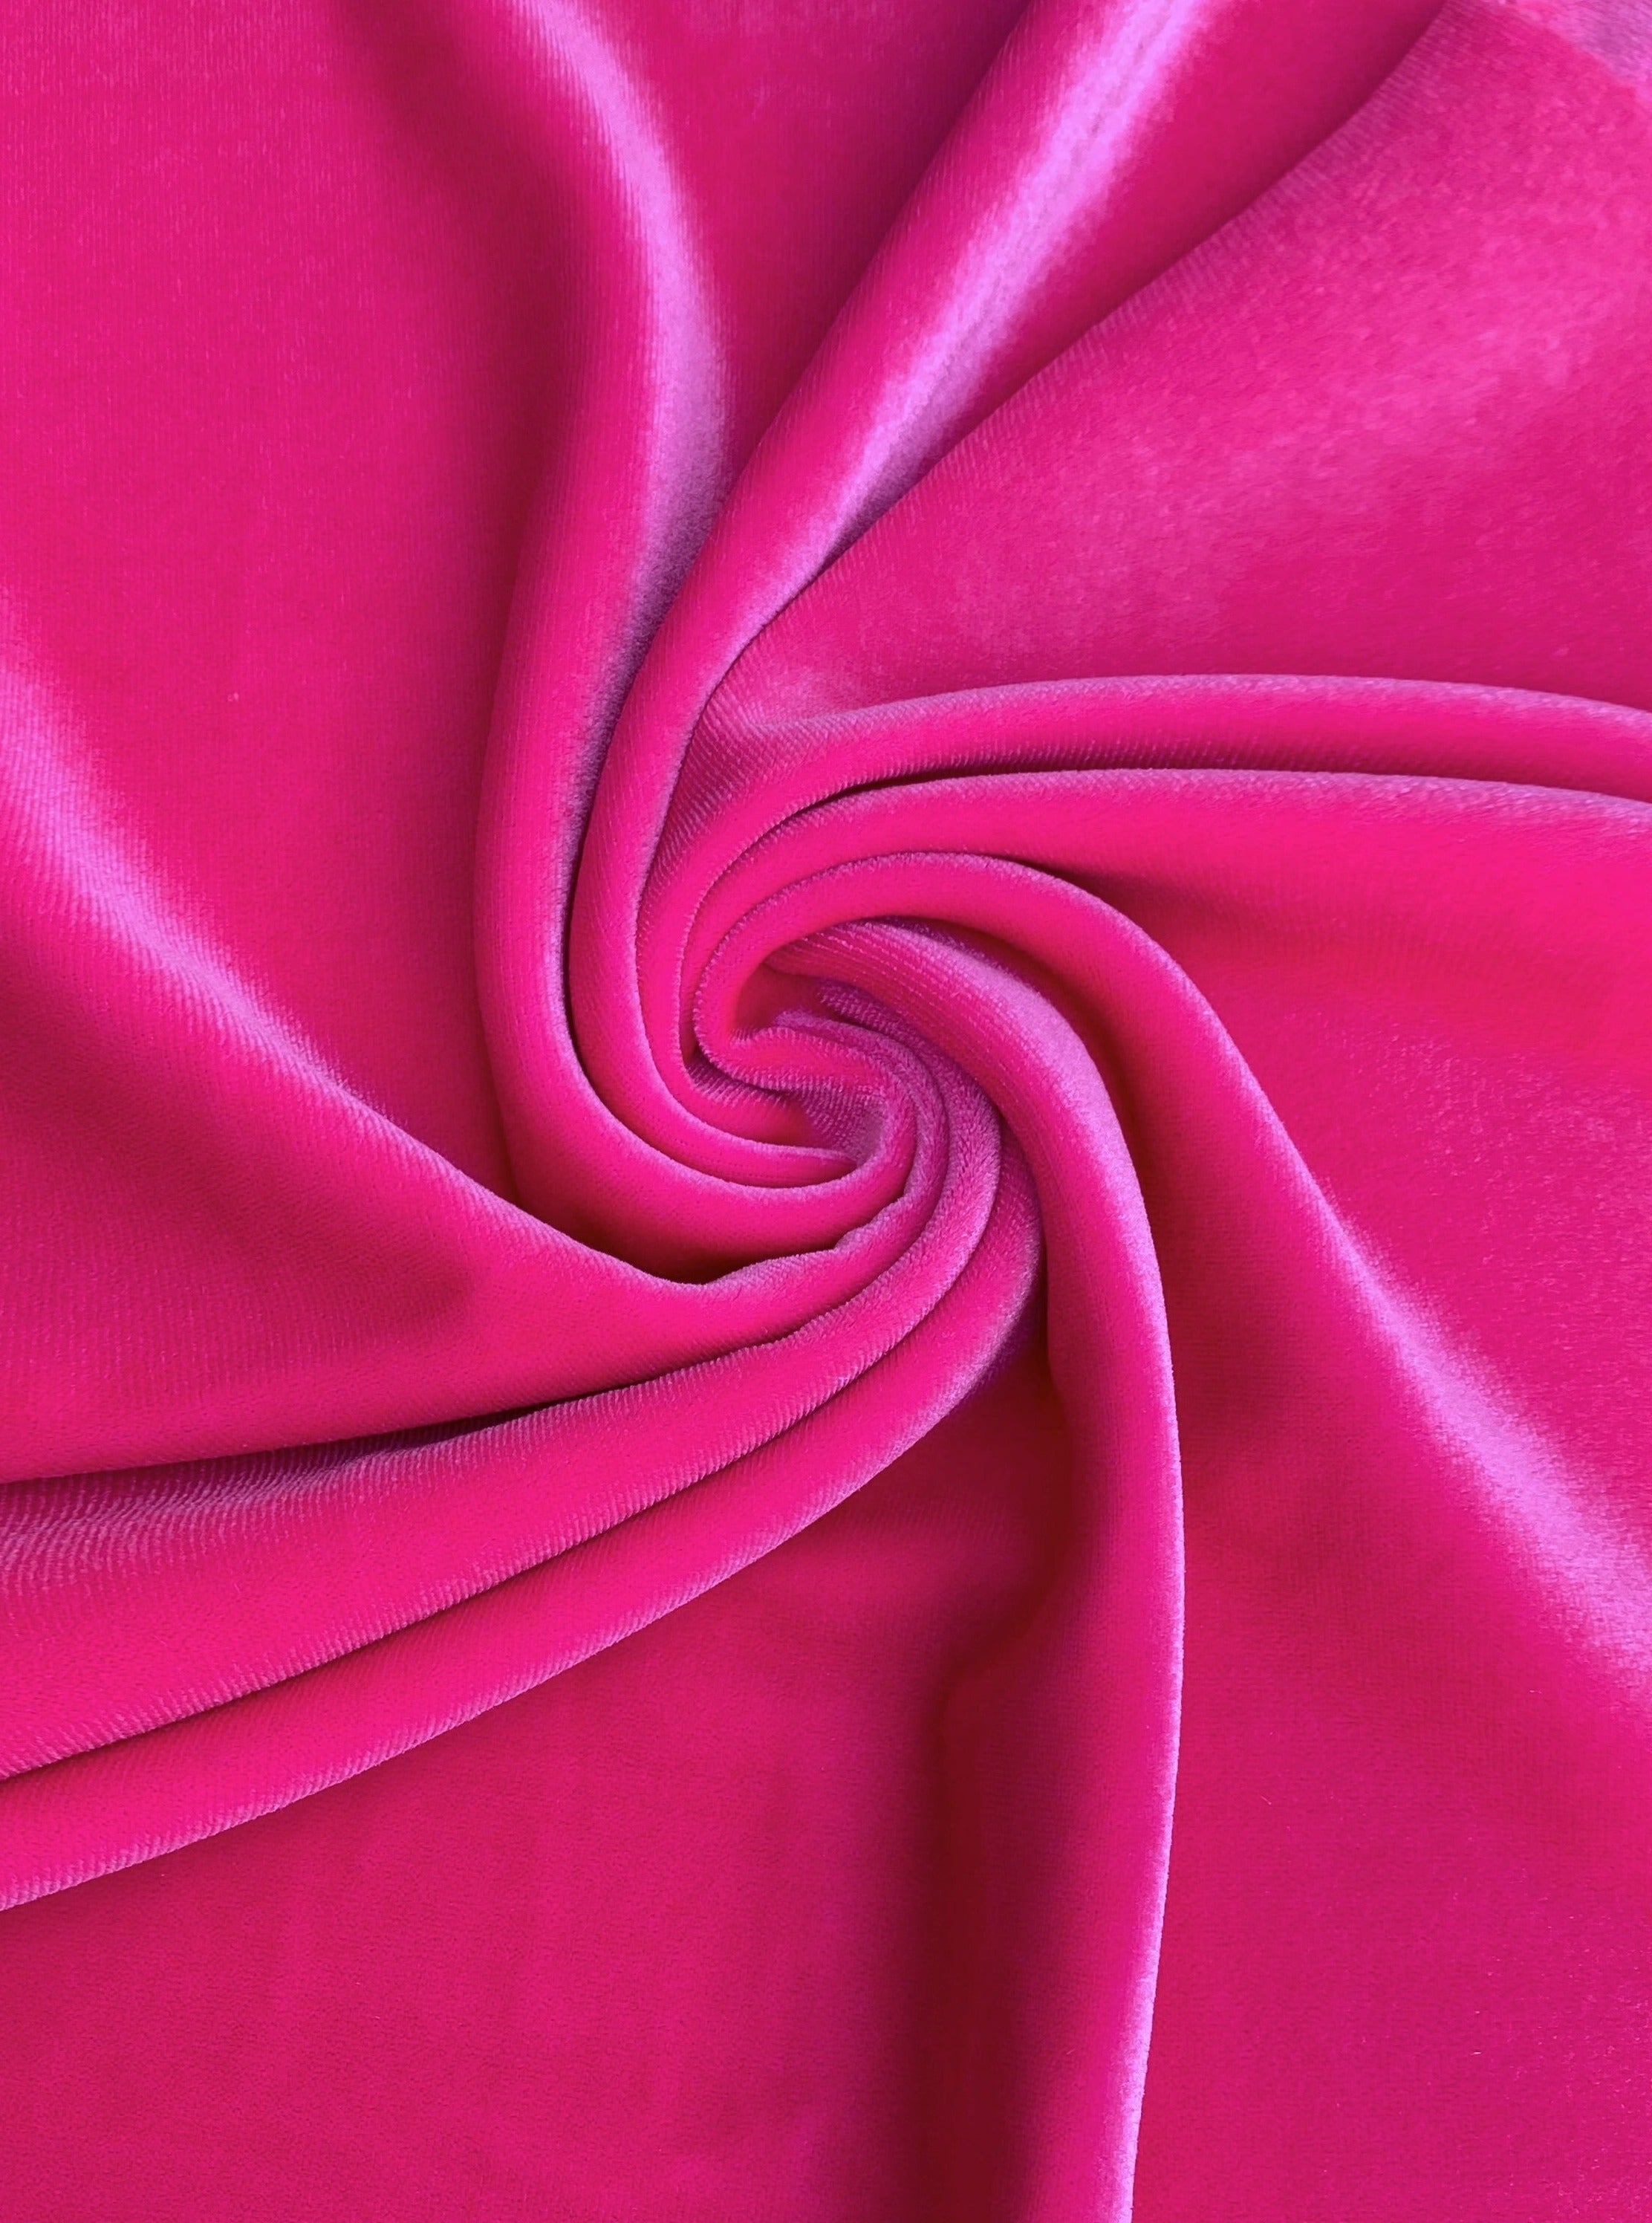 Hot Pink Stretch Velvet Fabric 60'' Wide by the Yard for Sewing